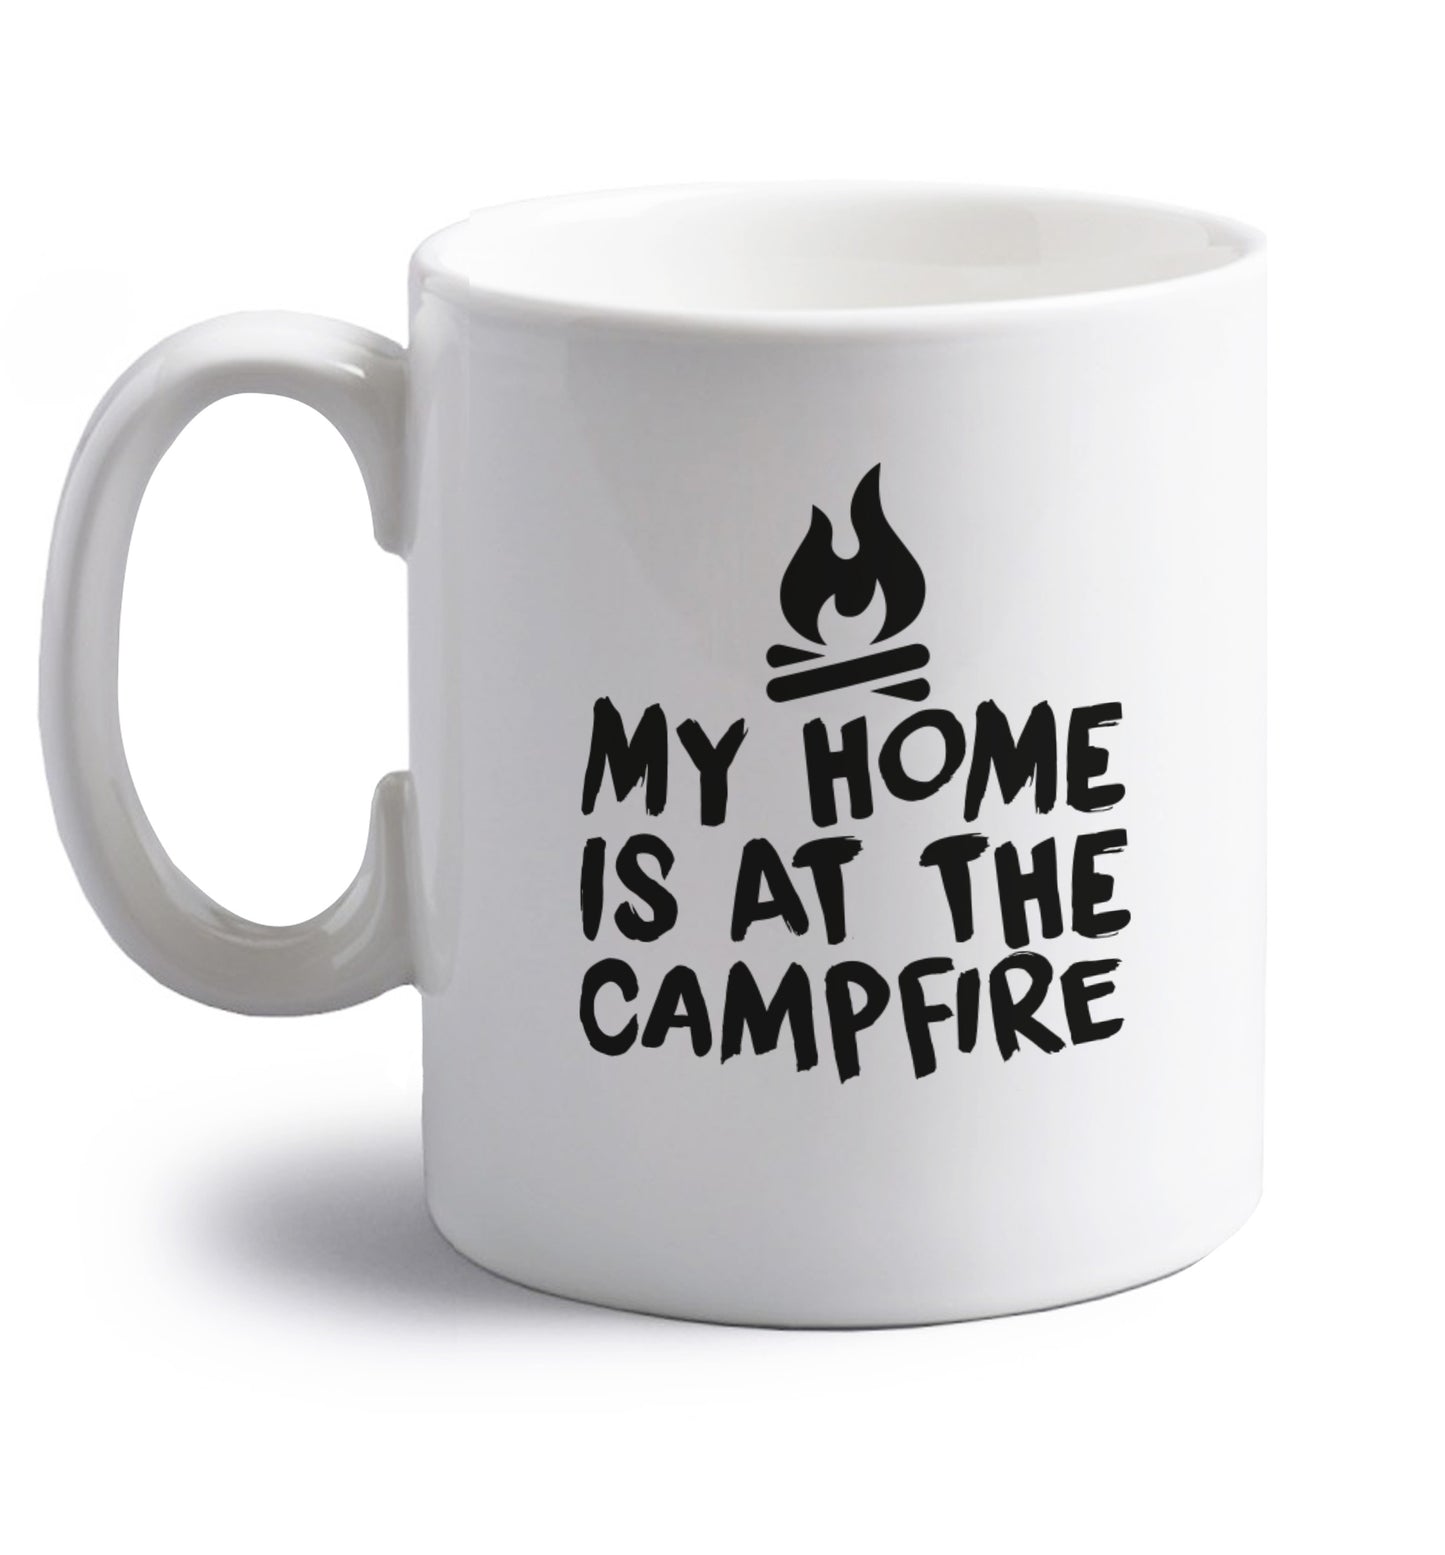 My home is at the campfire right handed white ceramic mug 